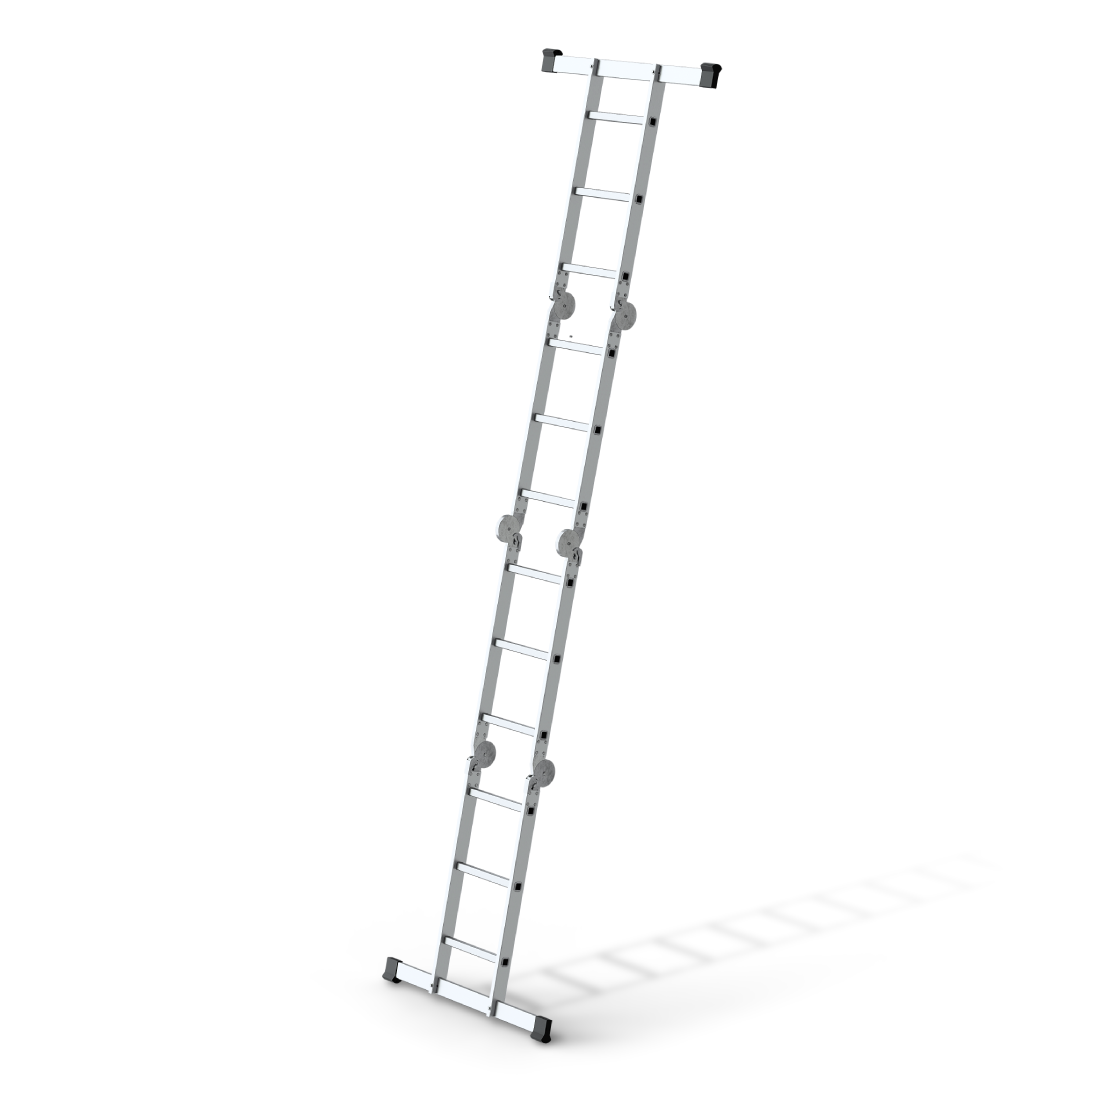 14 ft. Reach Astra Pro Type IA Aluminum Articulated Ladder With Platform - 330 lbs. Load Capacity